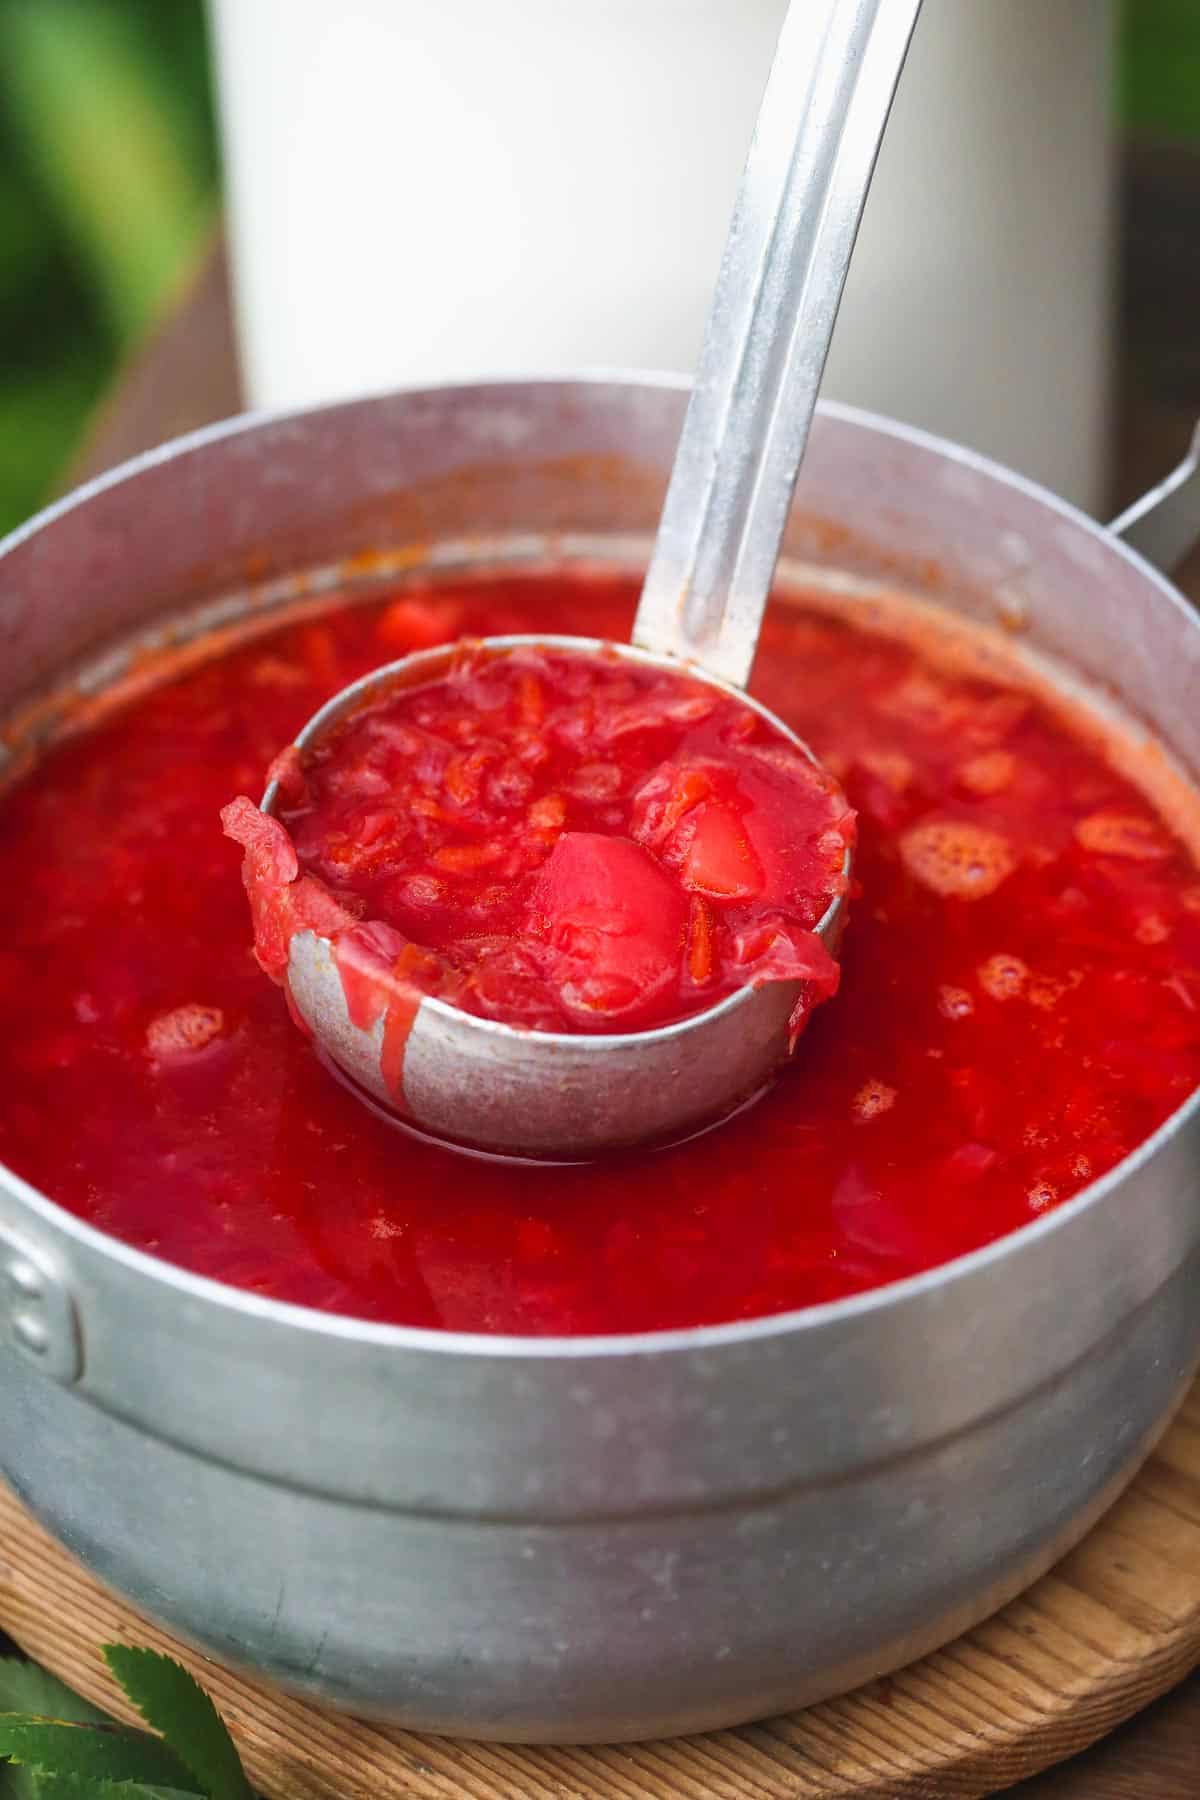 An aluminium pot filled with vibrant red borscht soup, and a soup ladle.